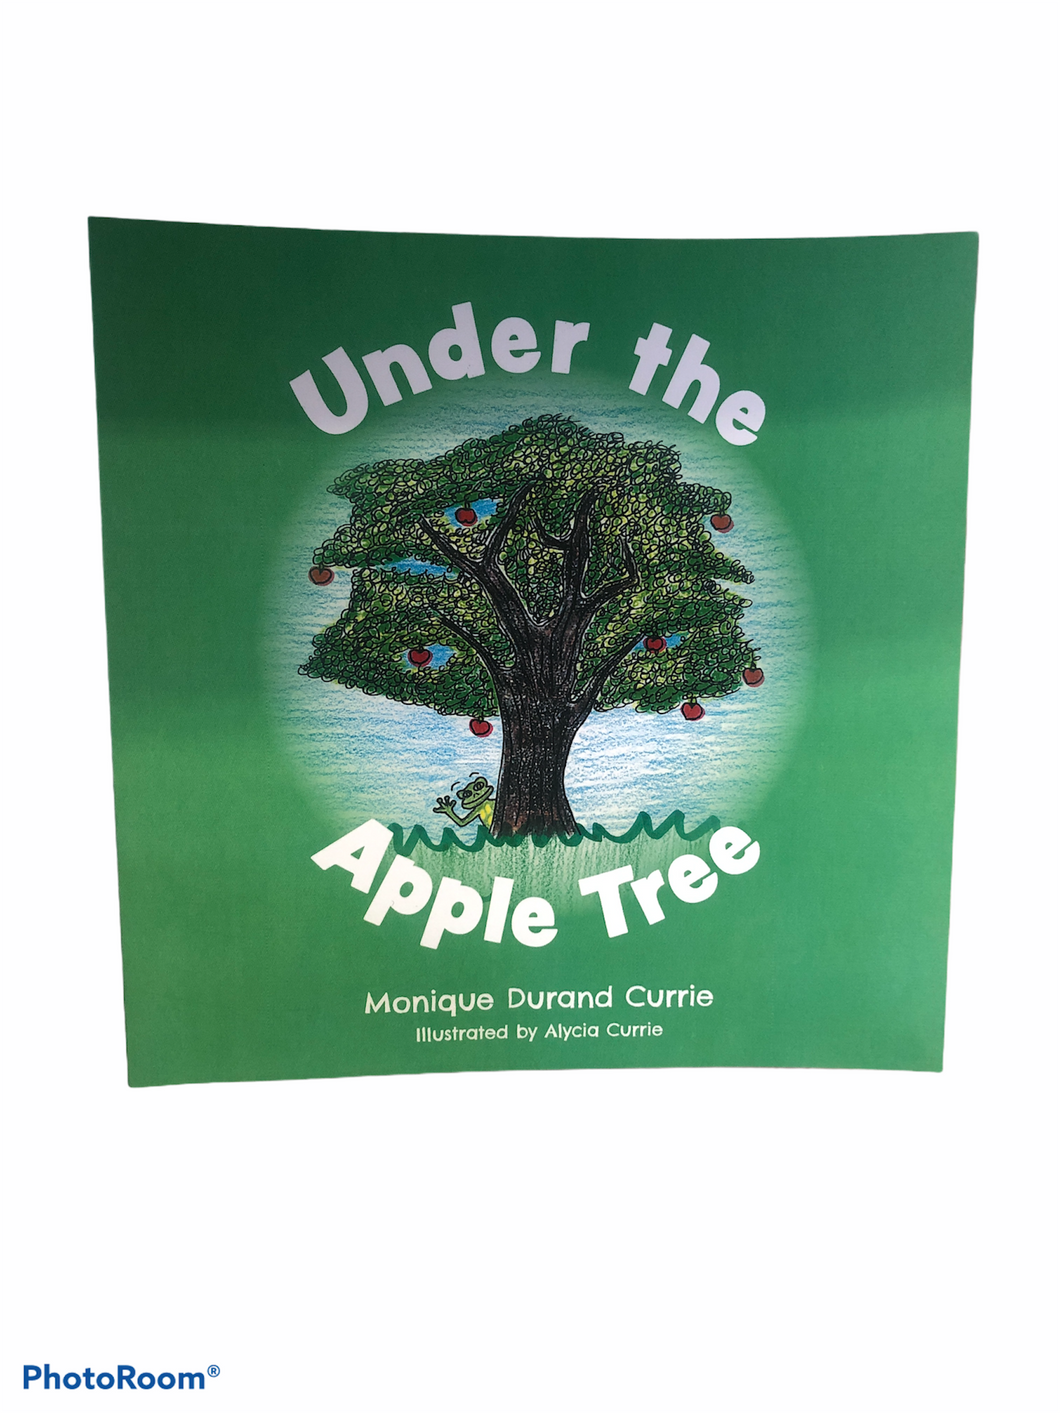 Book: Under the Apple Tree